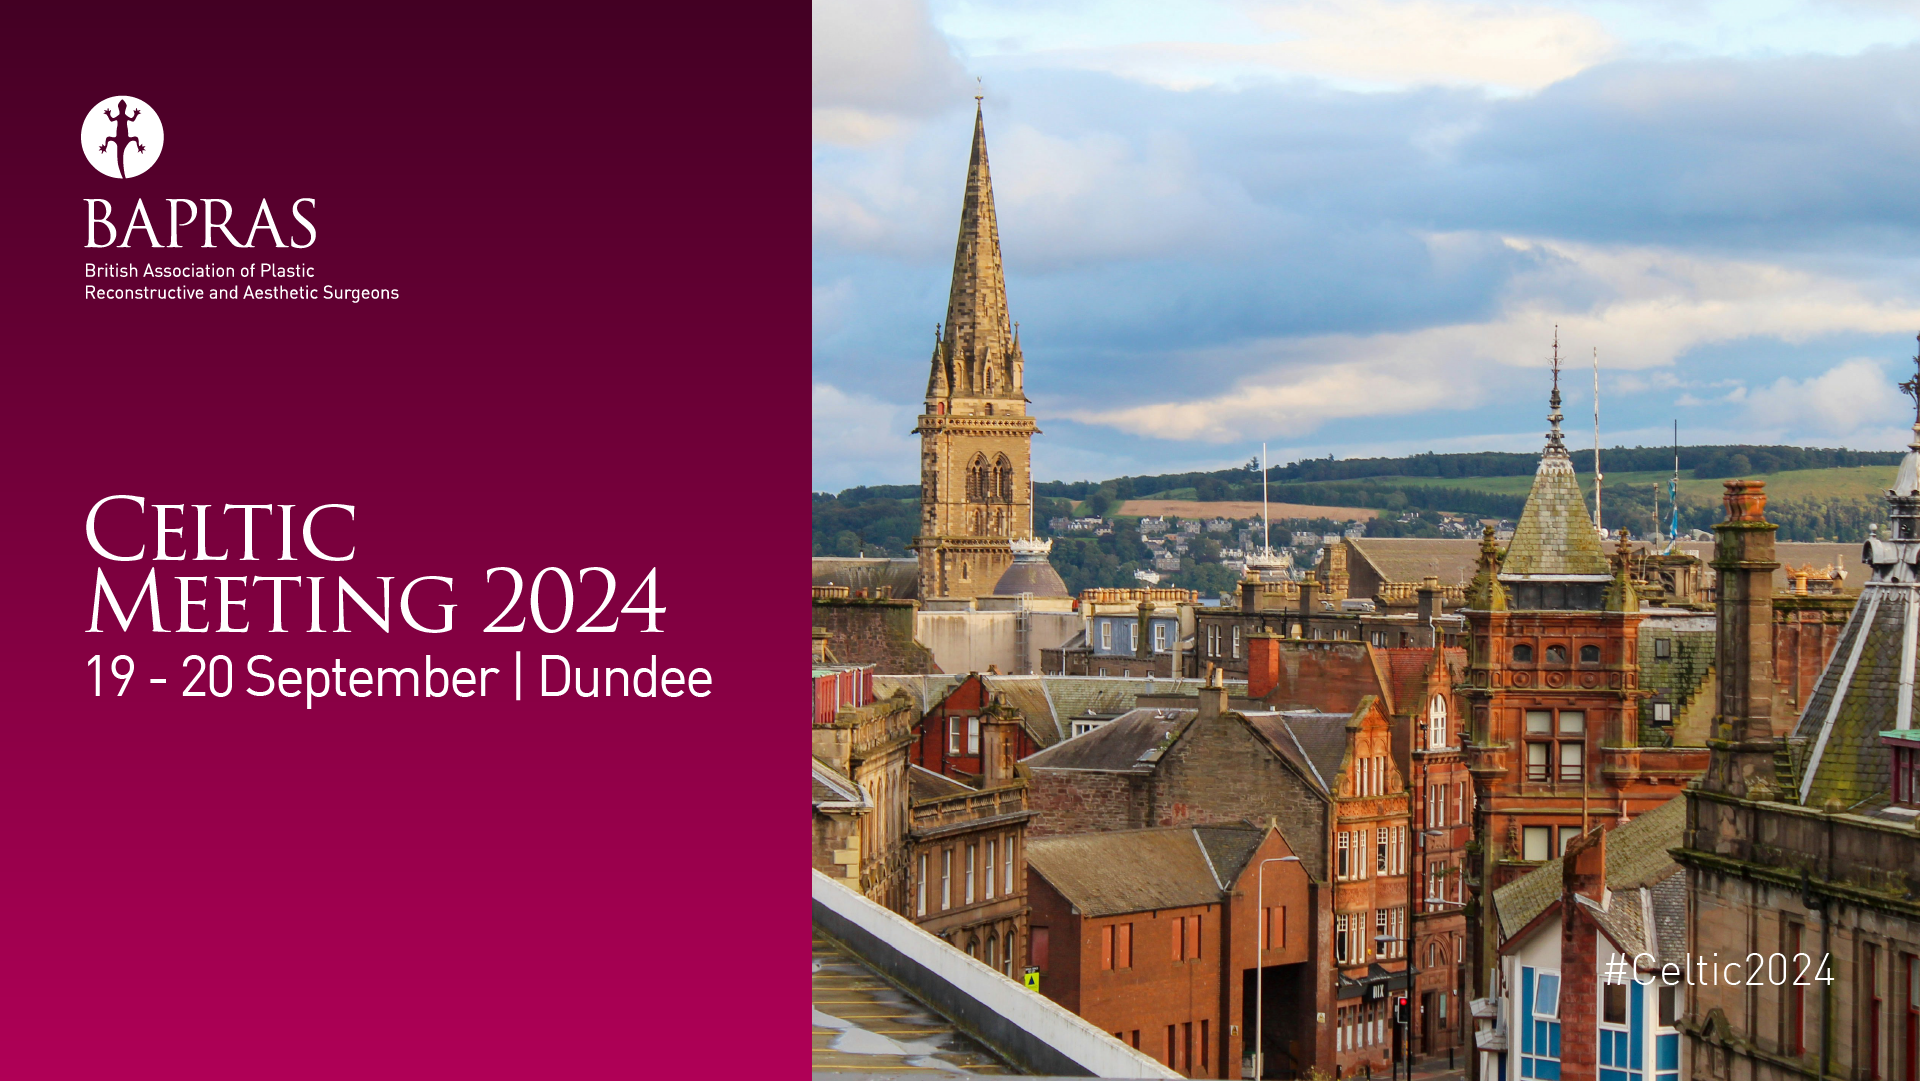 Abstract submission for the Celtic Meeting 2024 is now open!